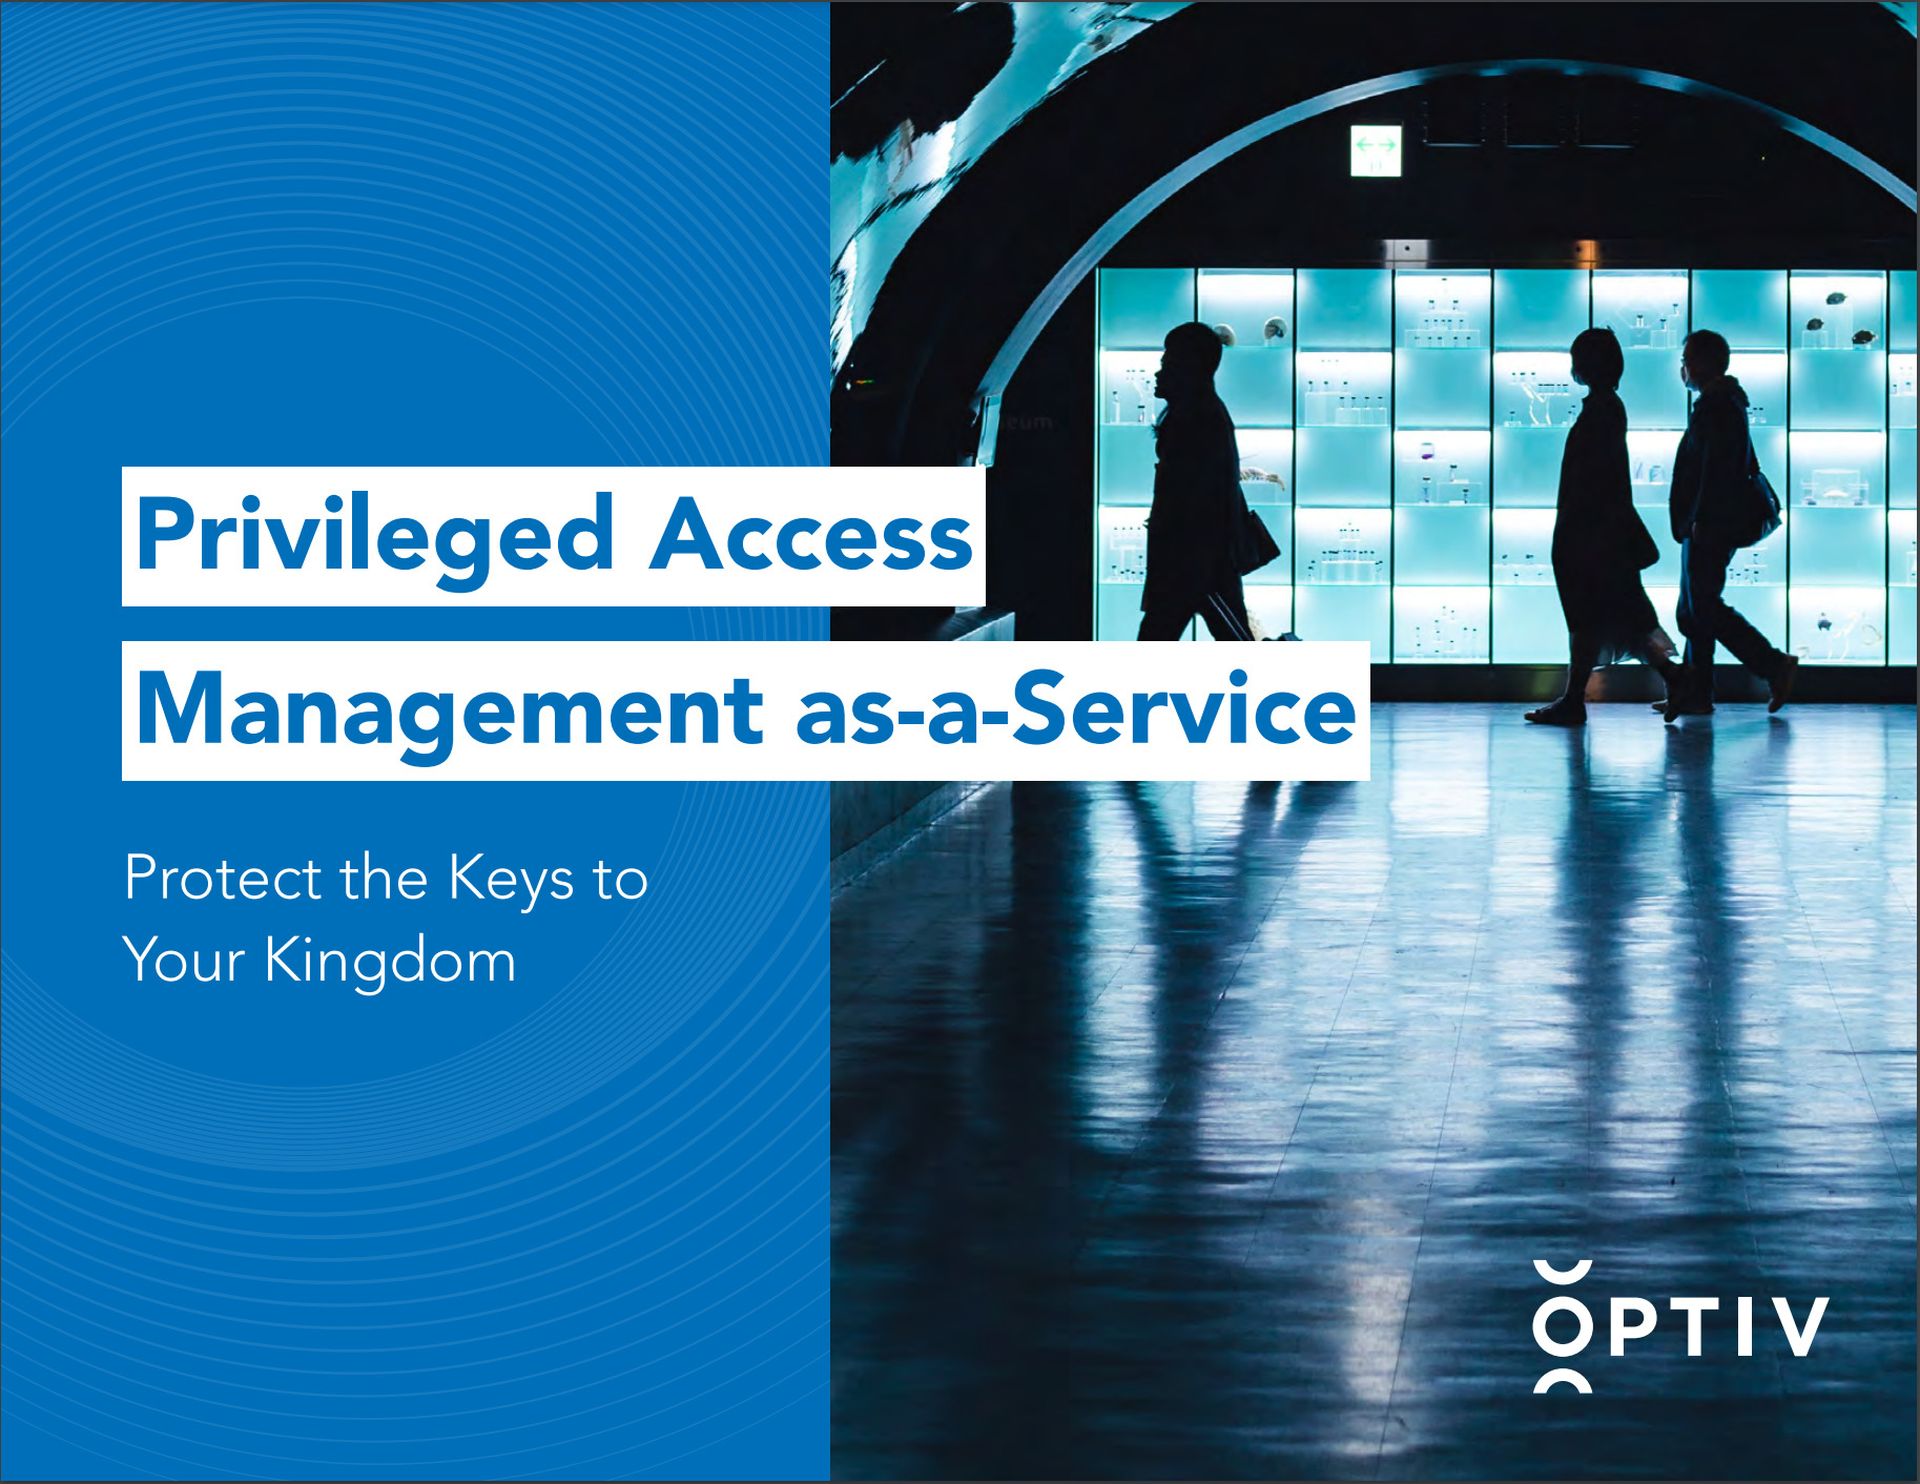 Privileged Access Management as-a-Service: Protecting the Keys to Your Kingdom